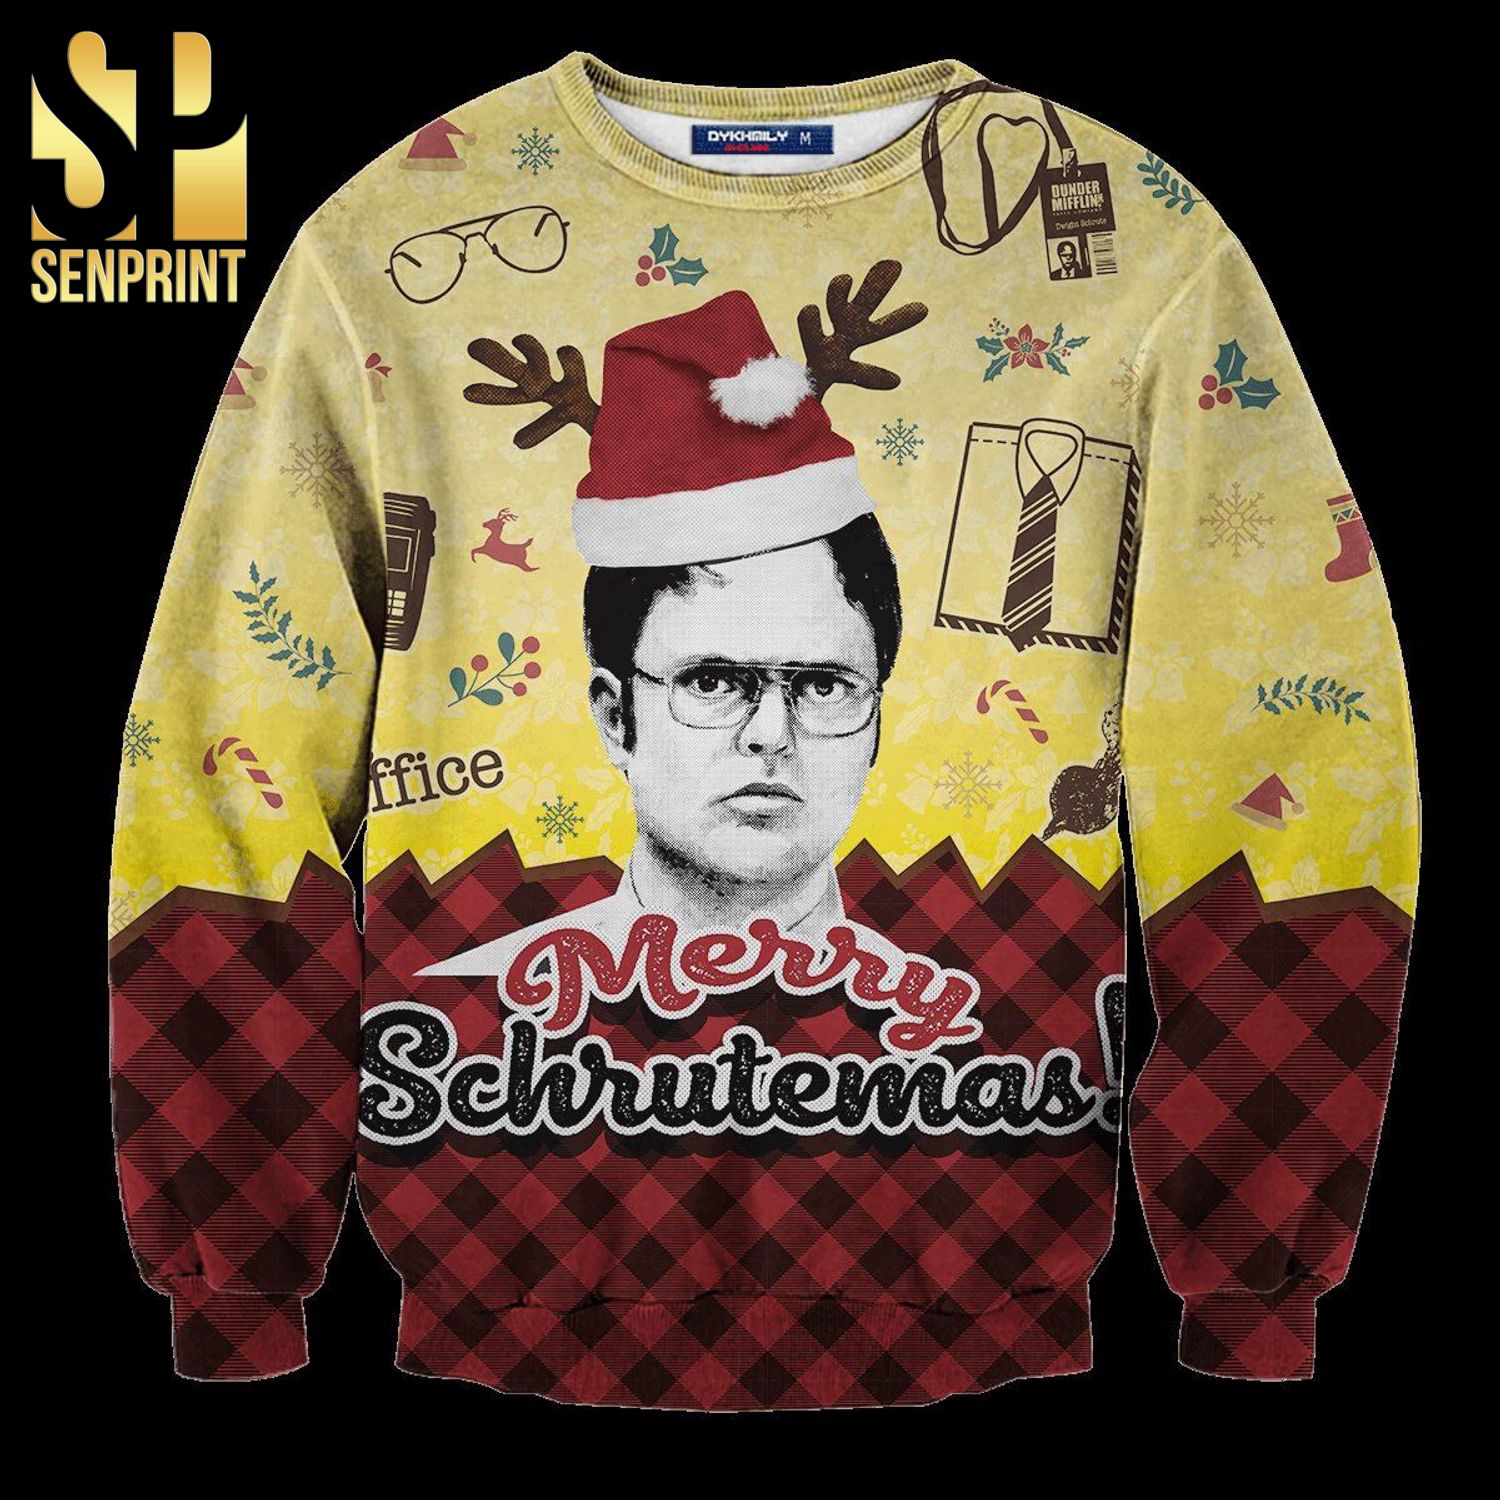 Dwight Schrute The Office Merry Schrutemas Knitted Ugly Christmas Sweater